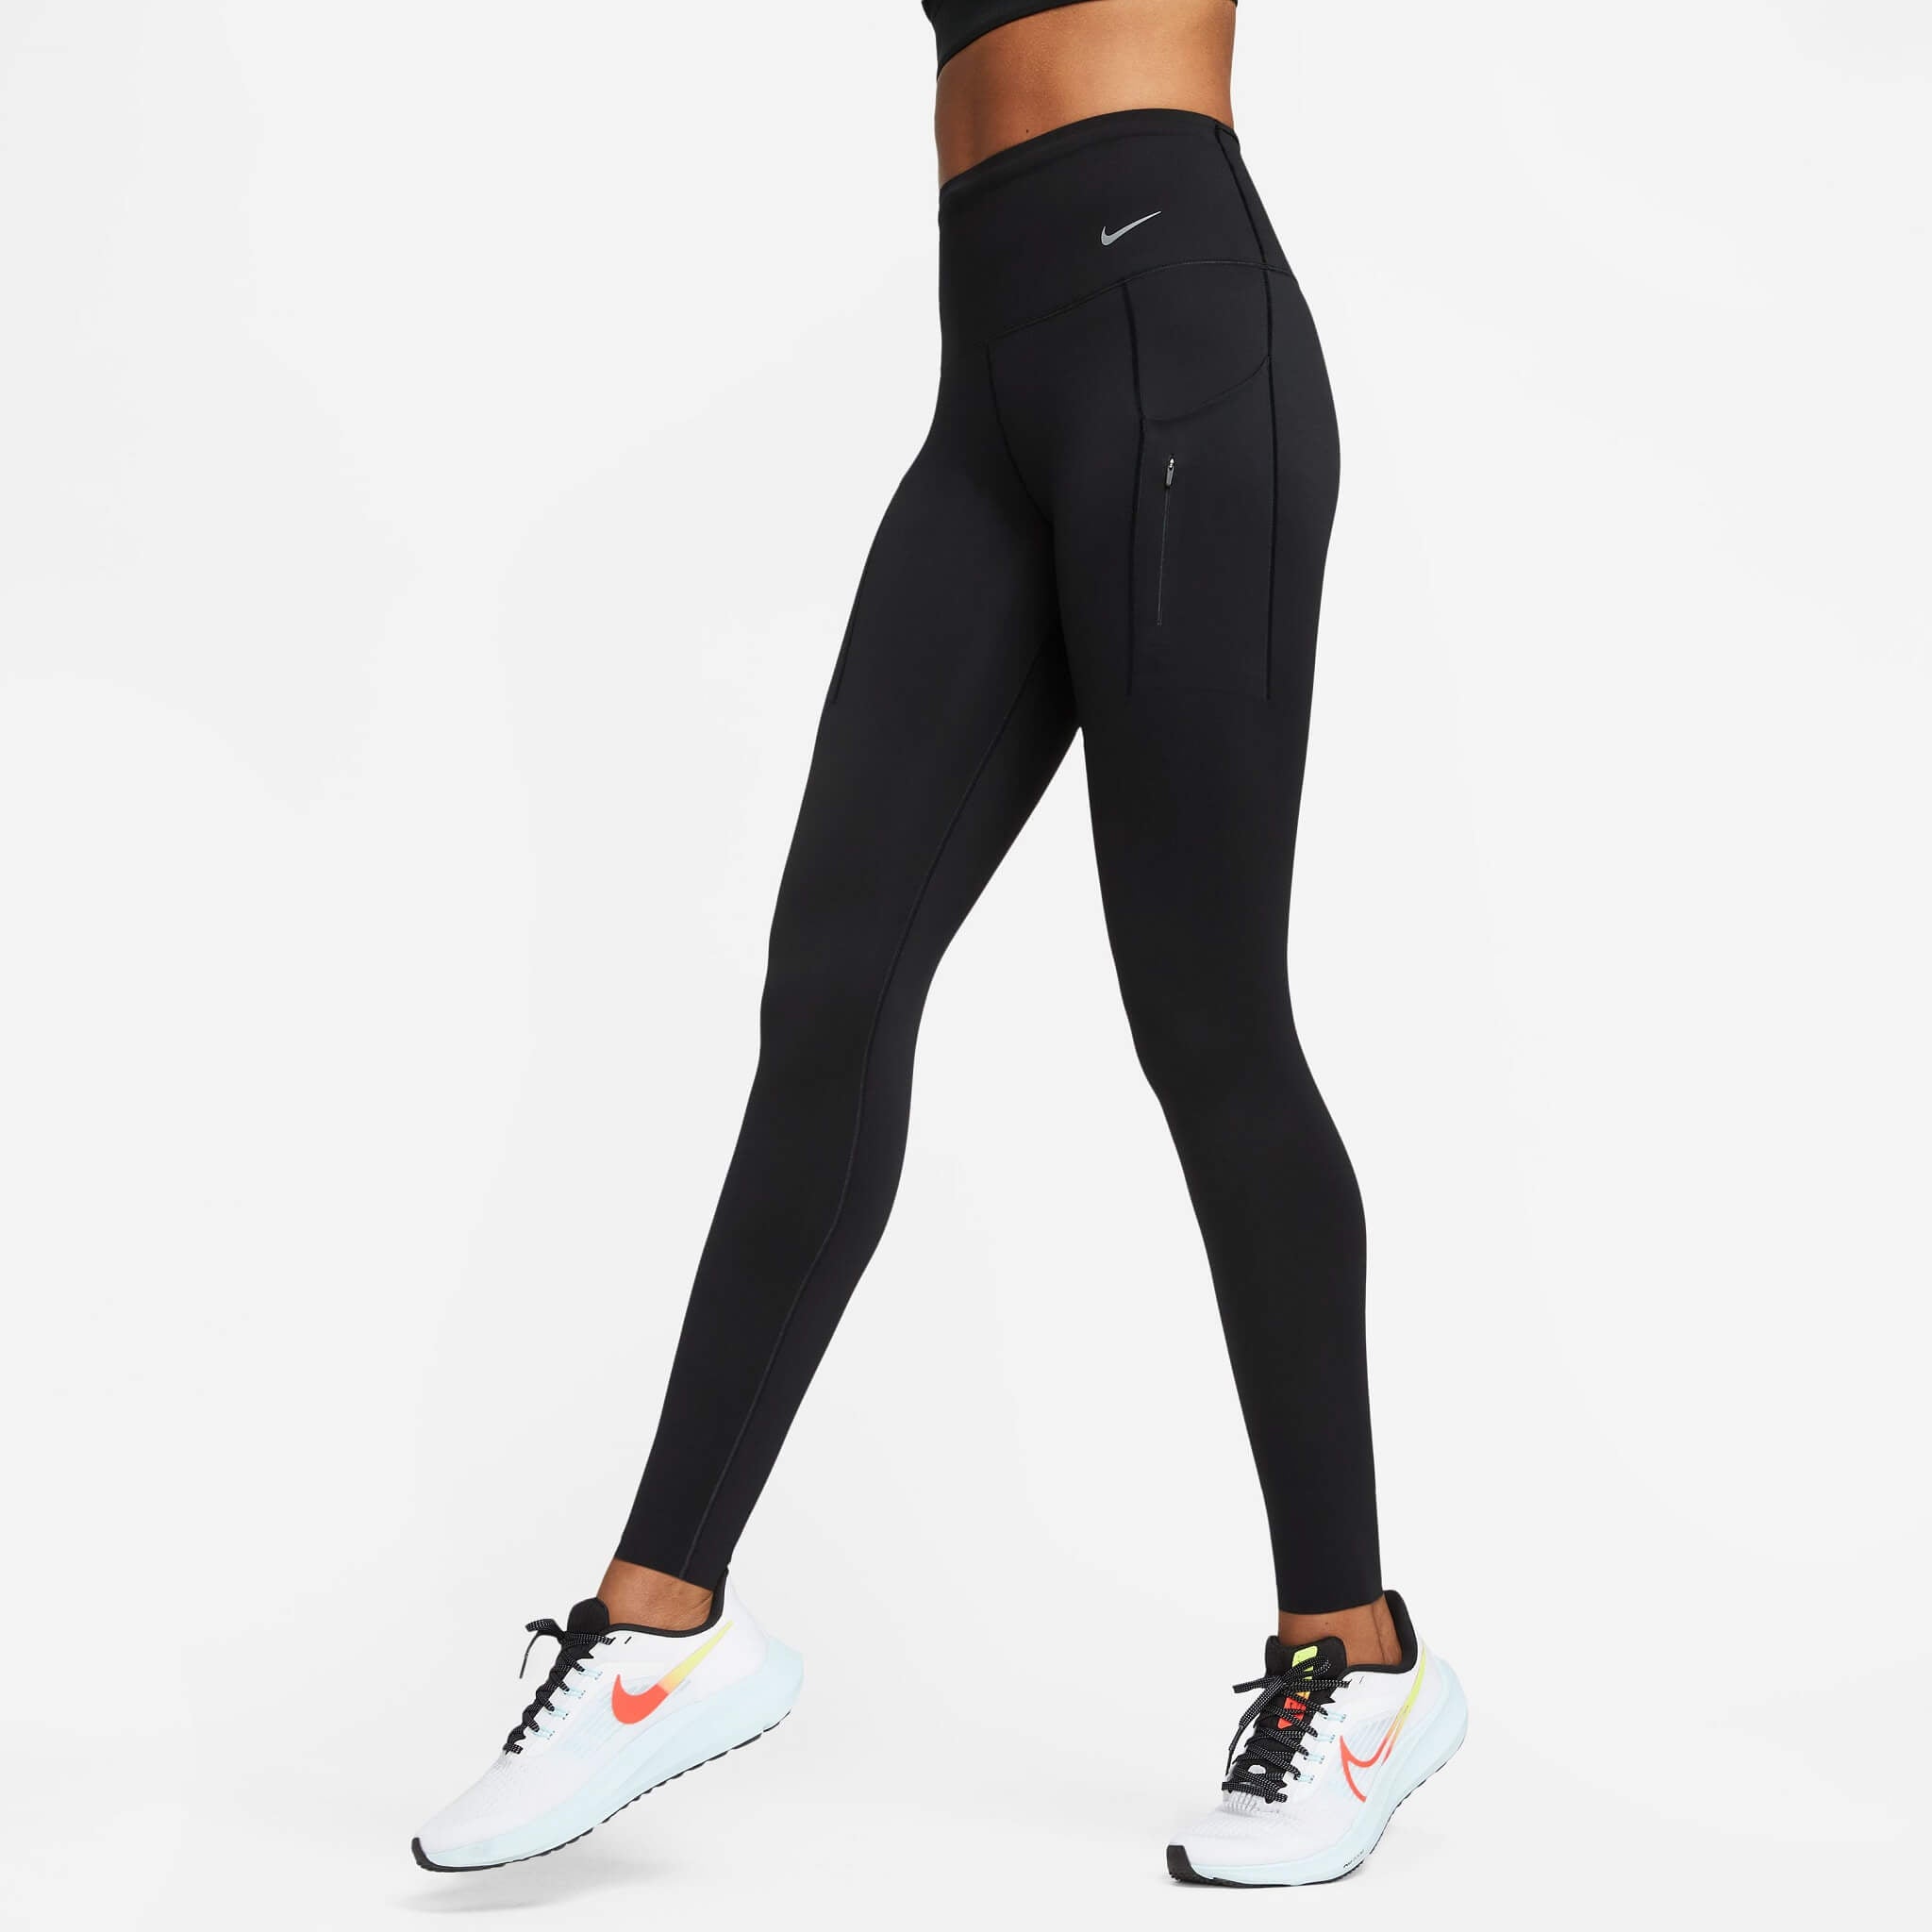 Nike One Dri-Fit Traning Full Length Firming Women's Sports Tights